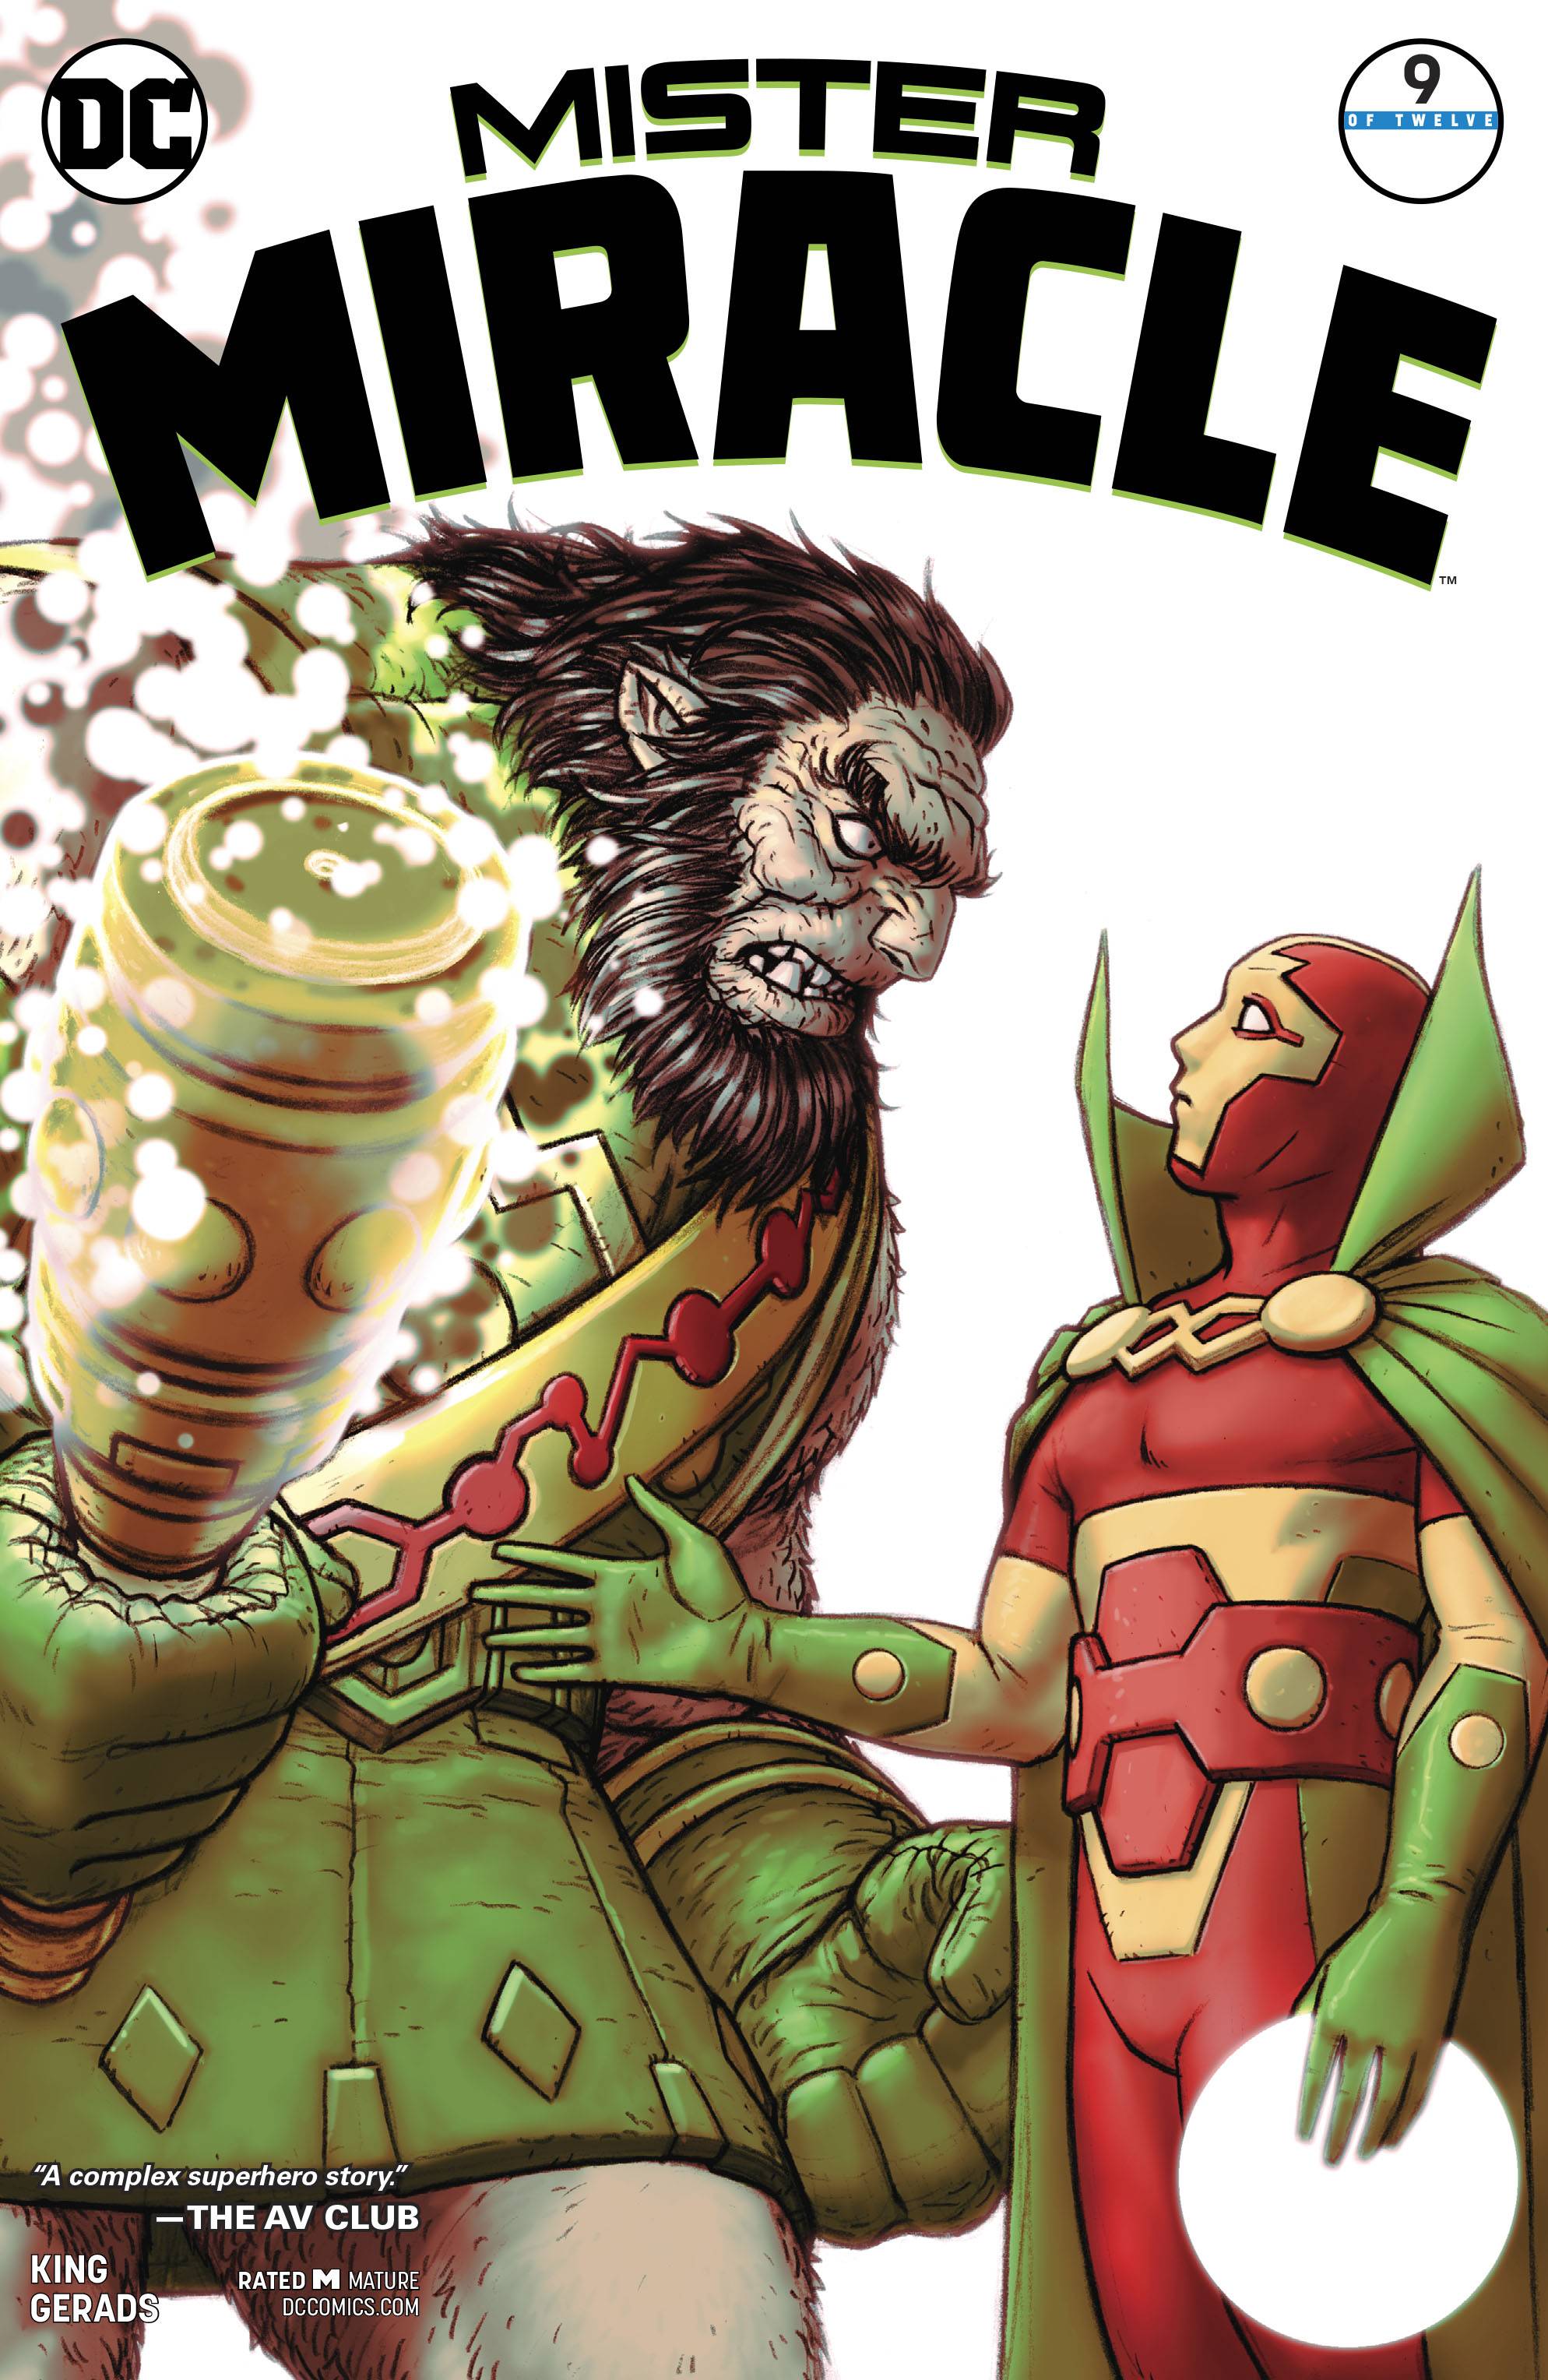 Mister Miracle #9 (Of 12) (Mature)